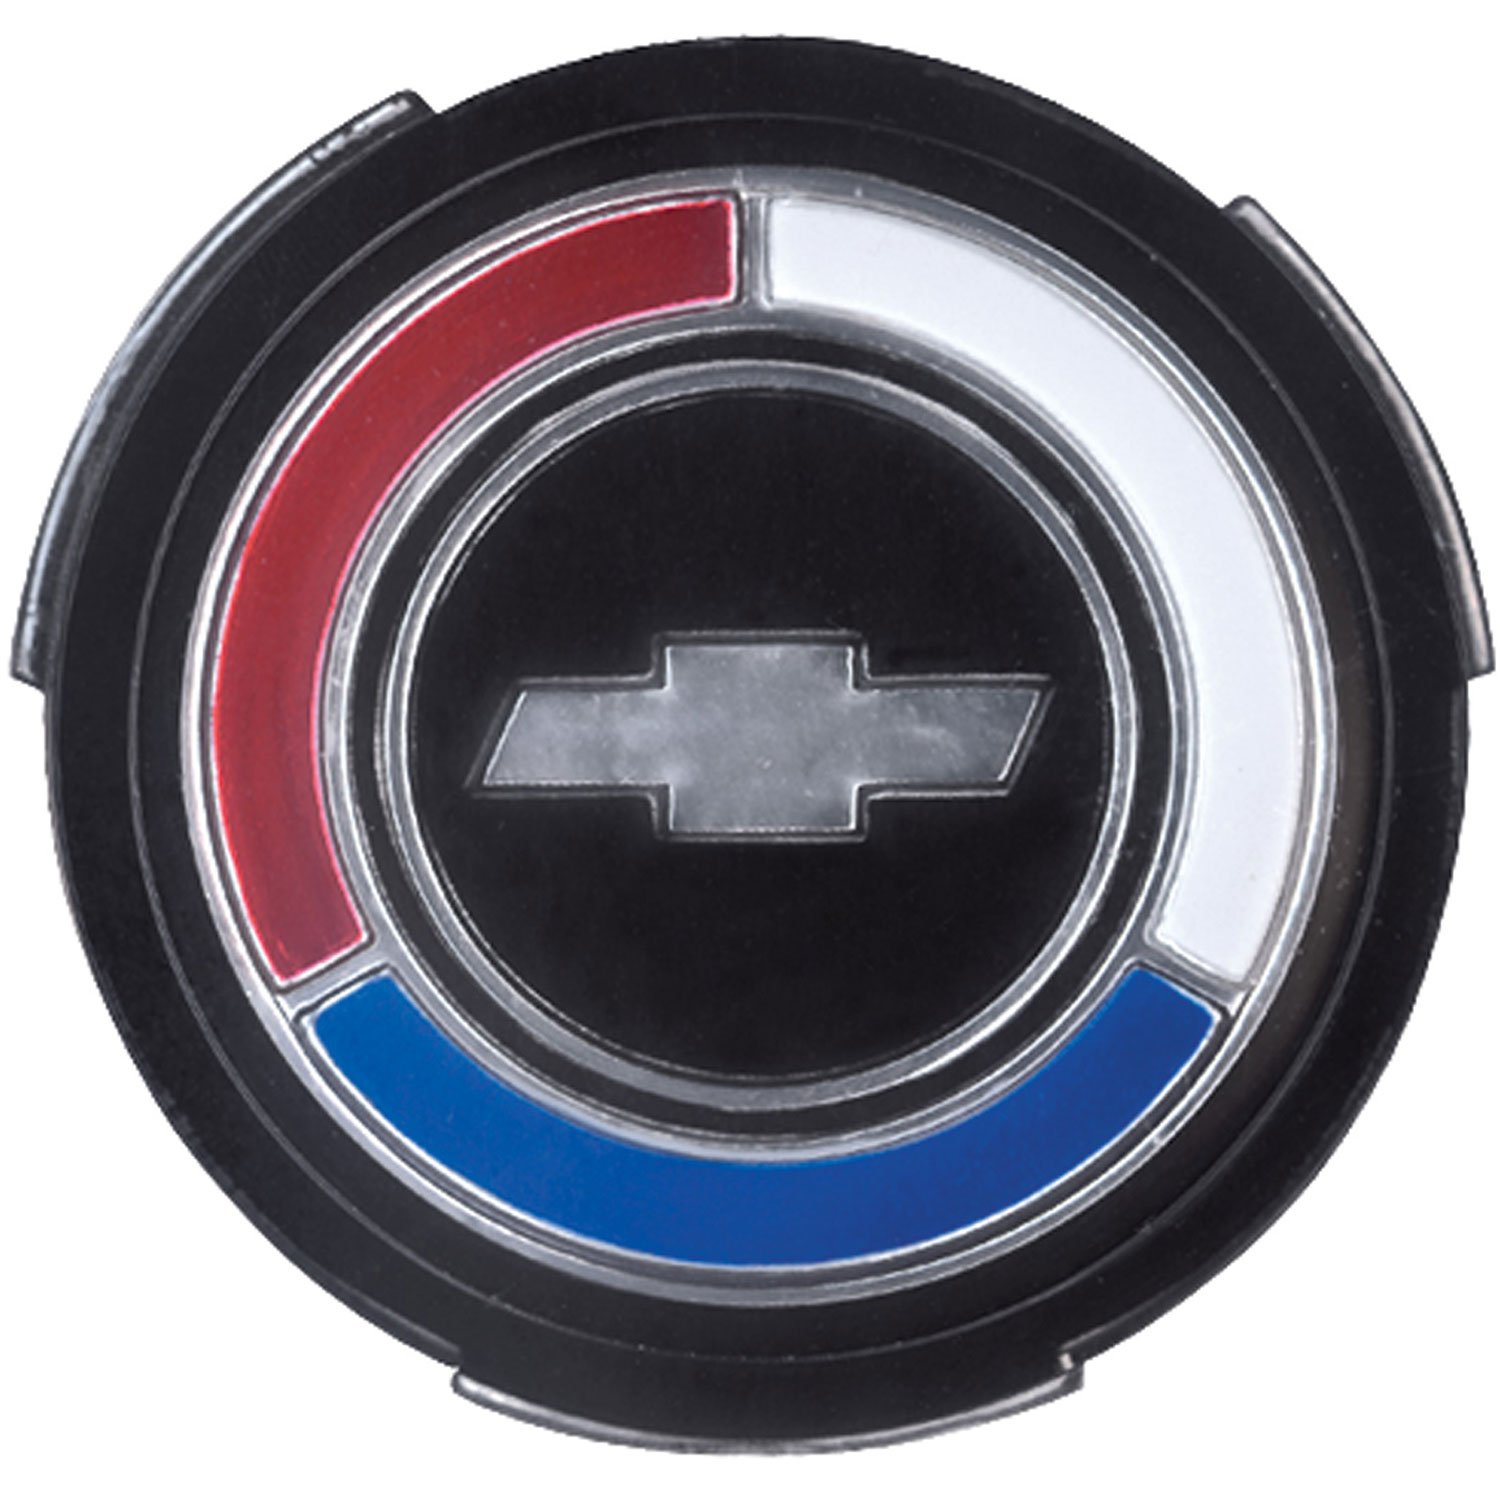 Hubcap Emblem for 1967-1968 Chevy Chevelle with Standard Wheels